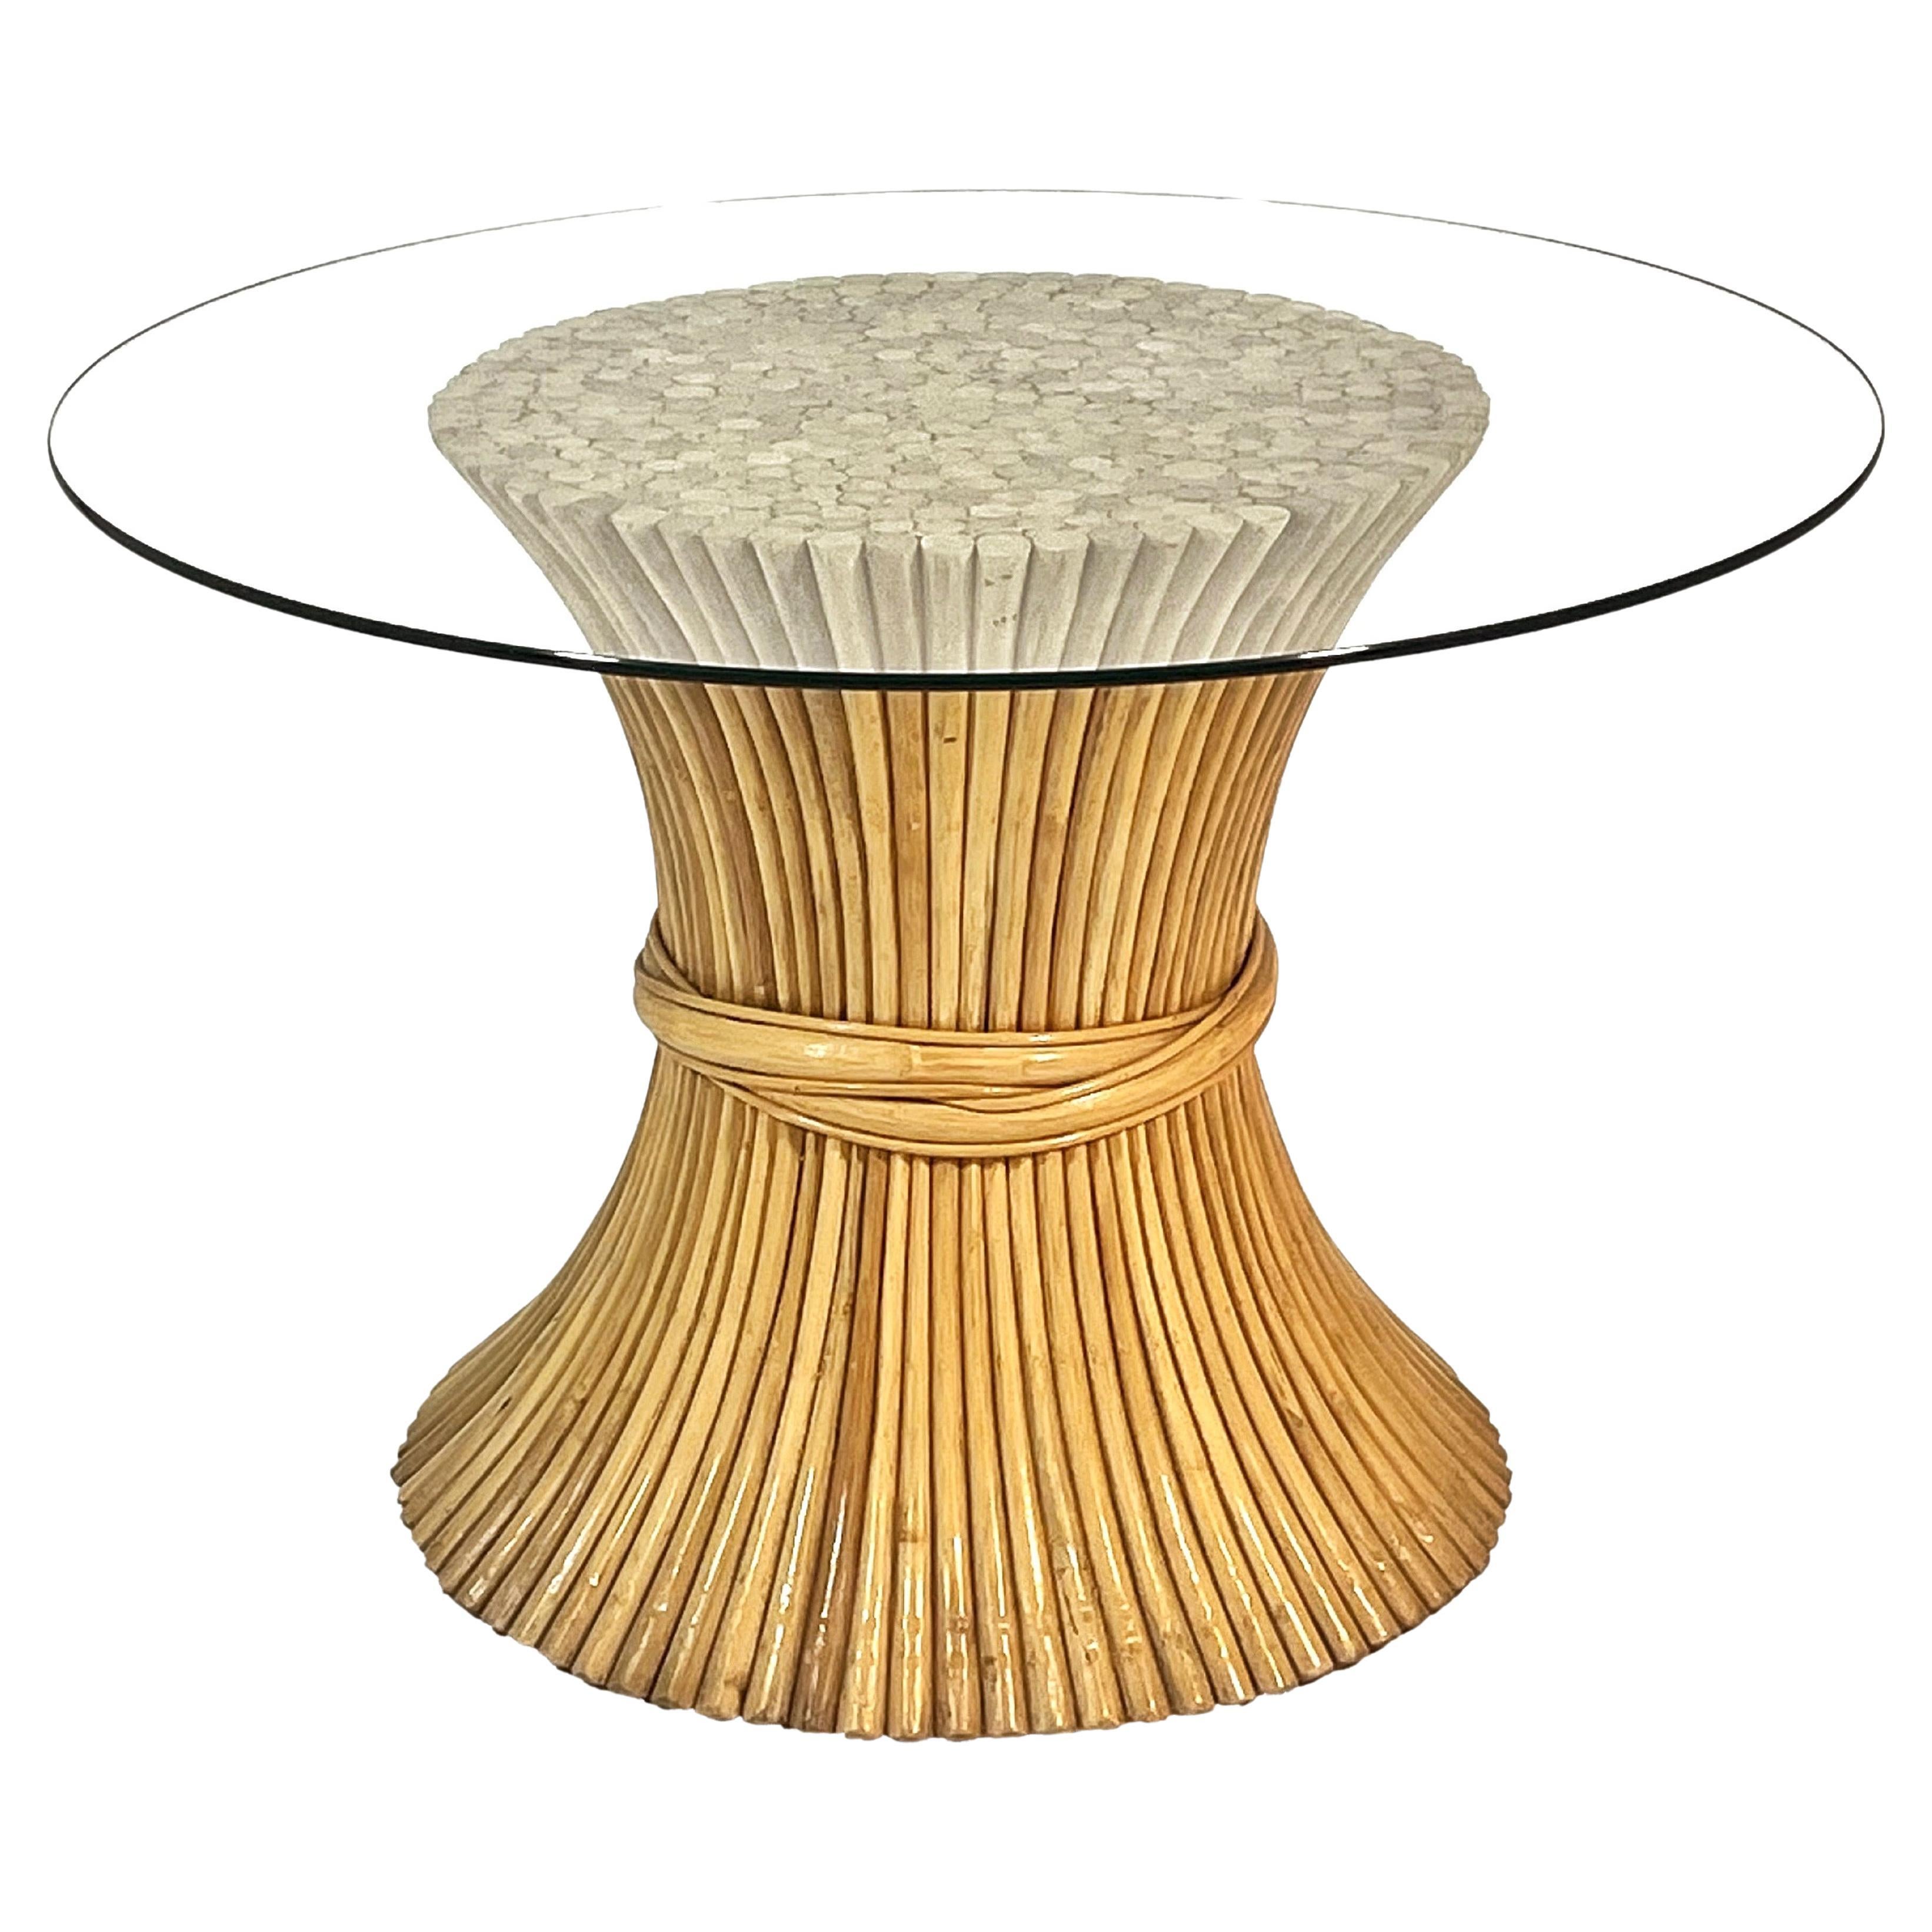 Elinor McGuire NP-10 Center / Dining Table For Sale